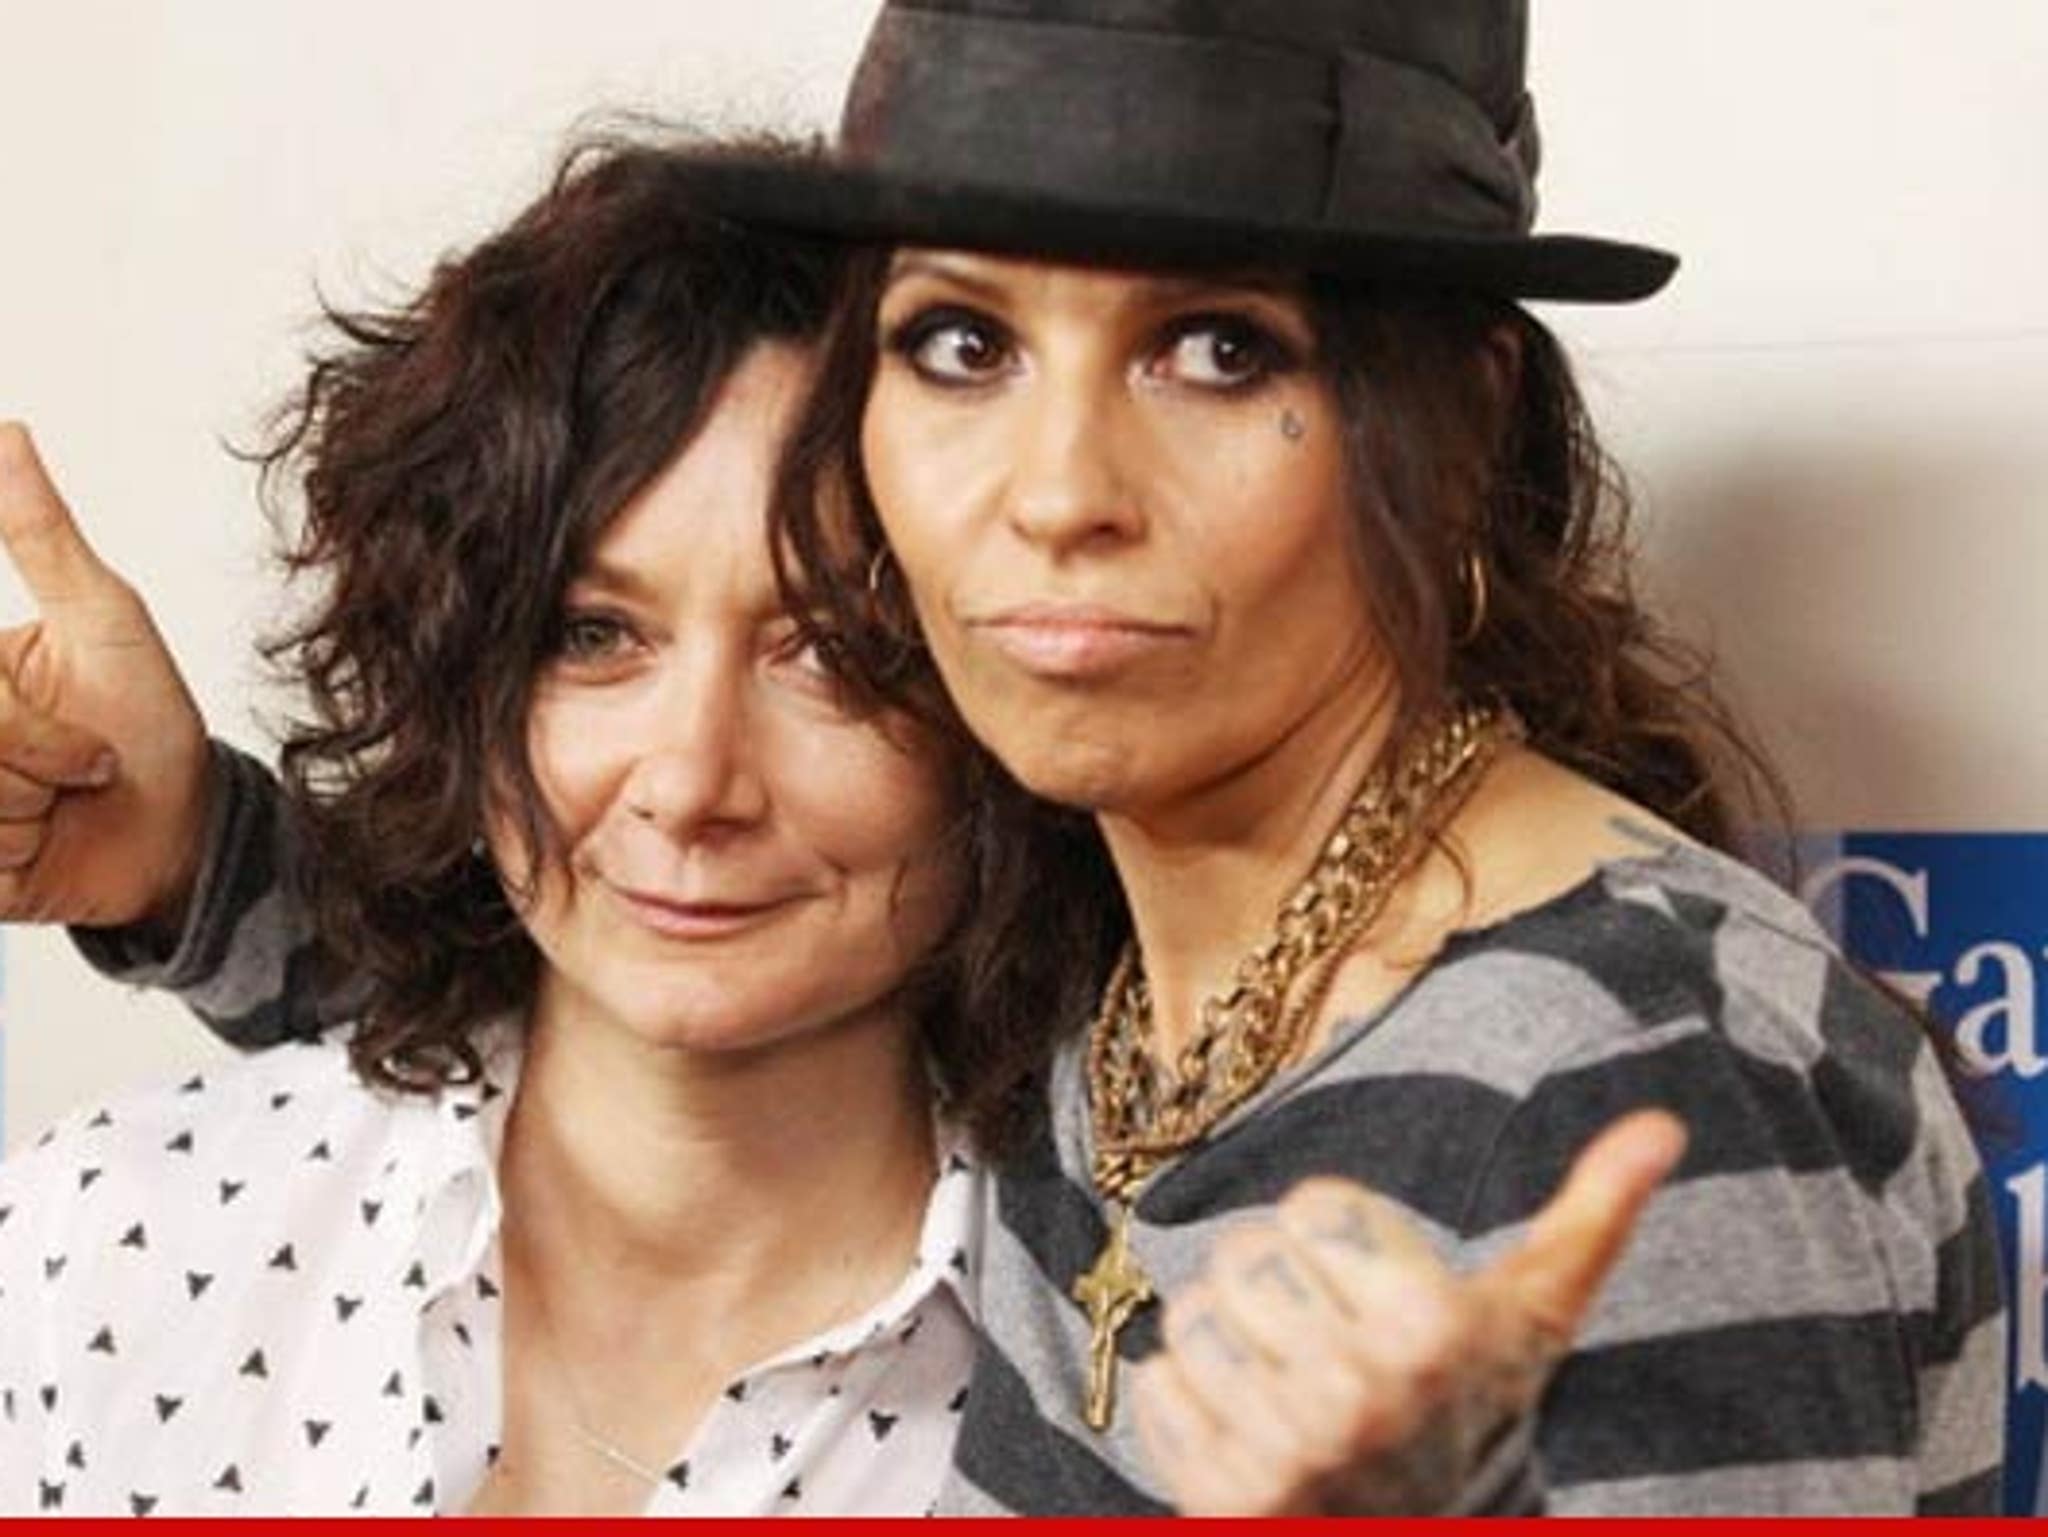 Linda Perry and Sara Gilbert -- Wedding? More Like a Rock Show with Vows